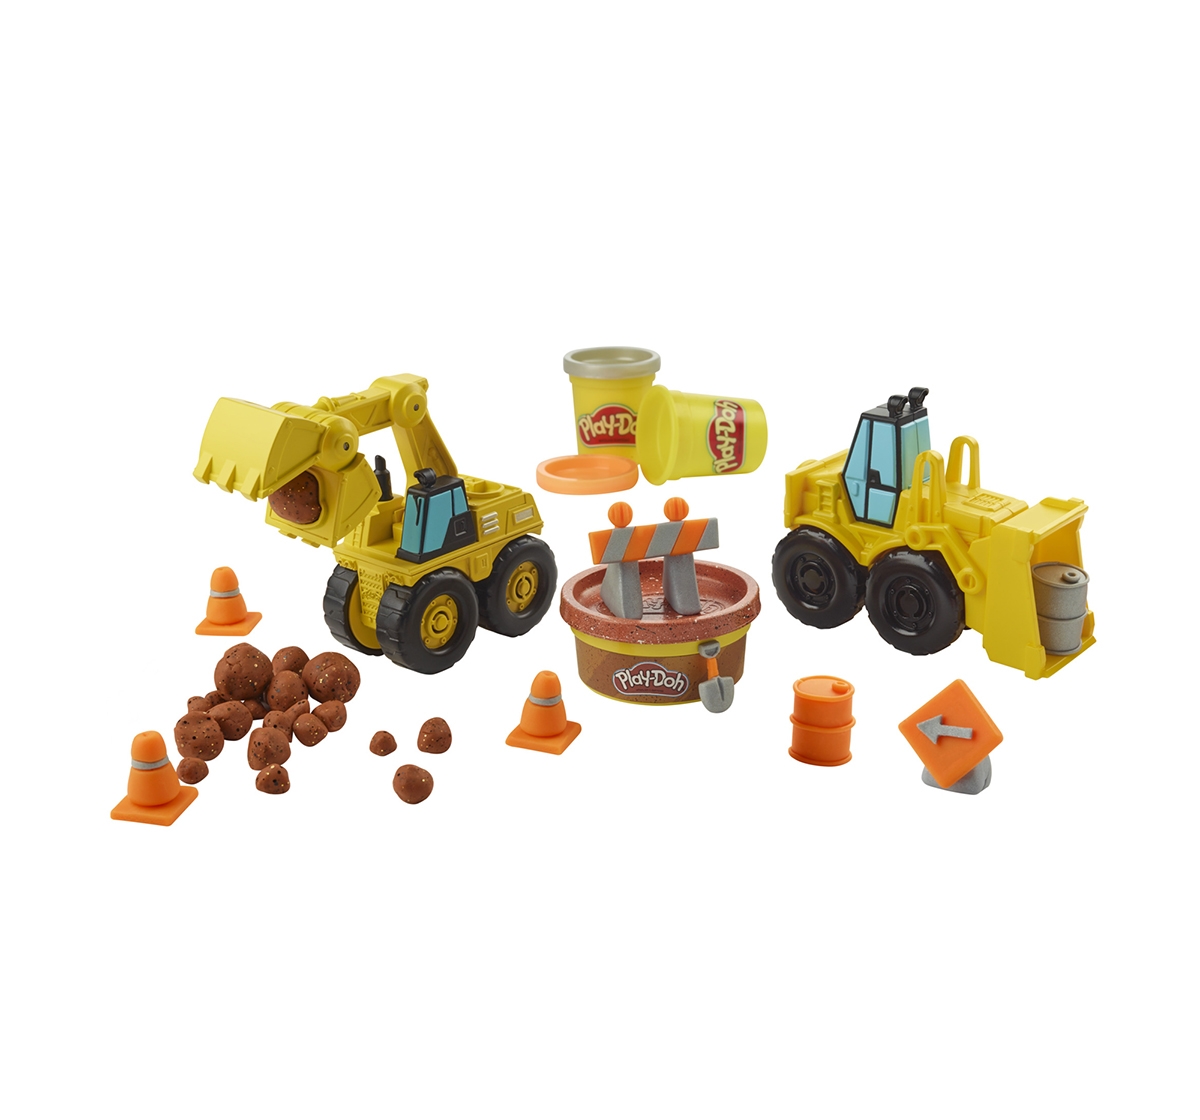 Play-Doh | Play-Doh Excavator N Loader Clay & Dough for Kids age 3Y+ 